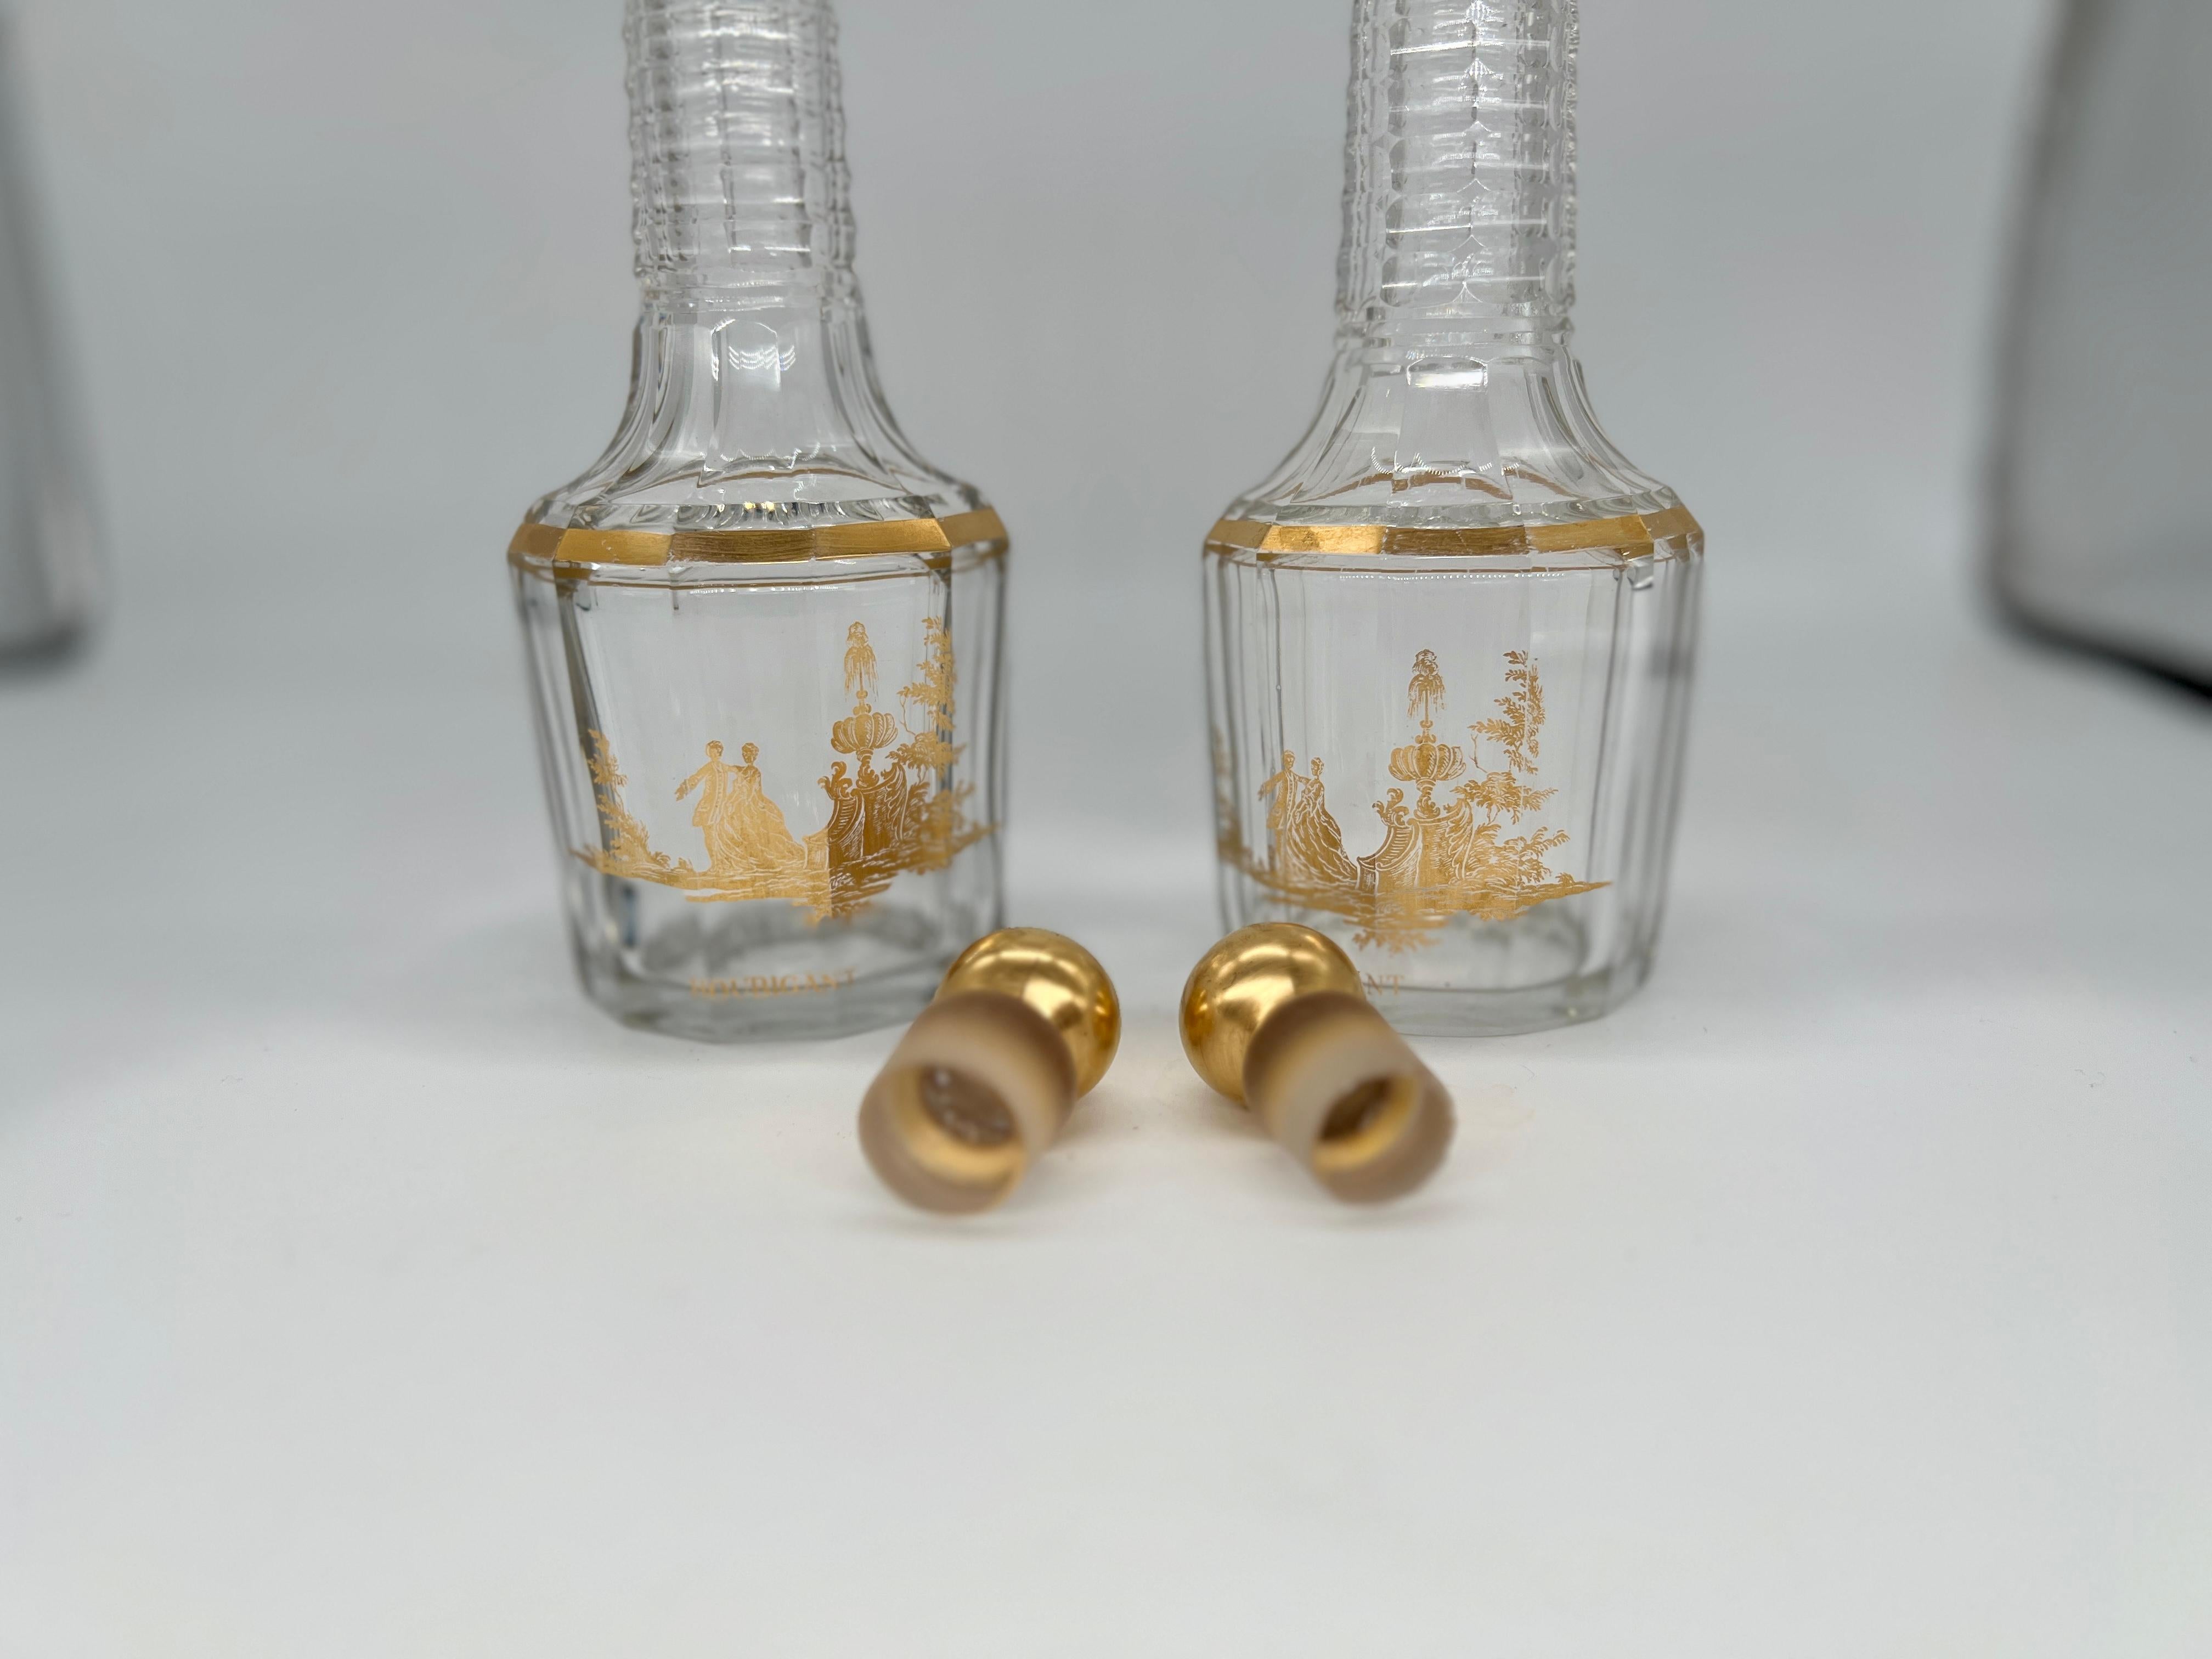 20th Century Pair, Antique French Baccarat Houbigant Gilt Crystal Perfume Bottles C. 1920 For Sale